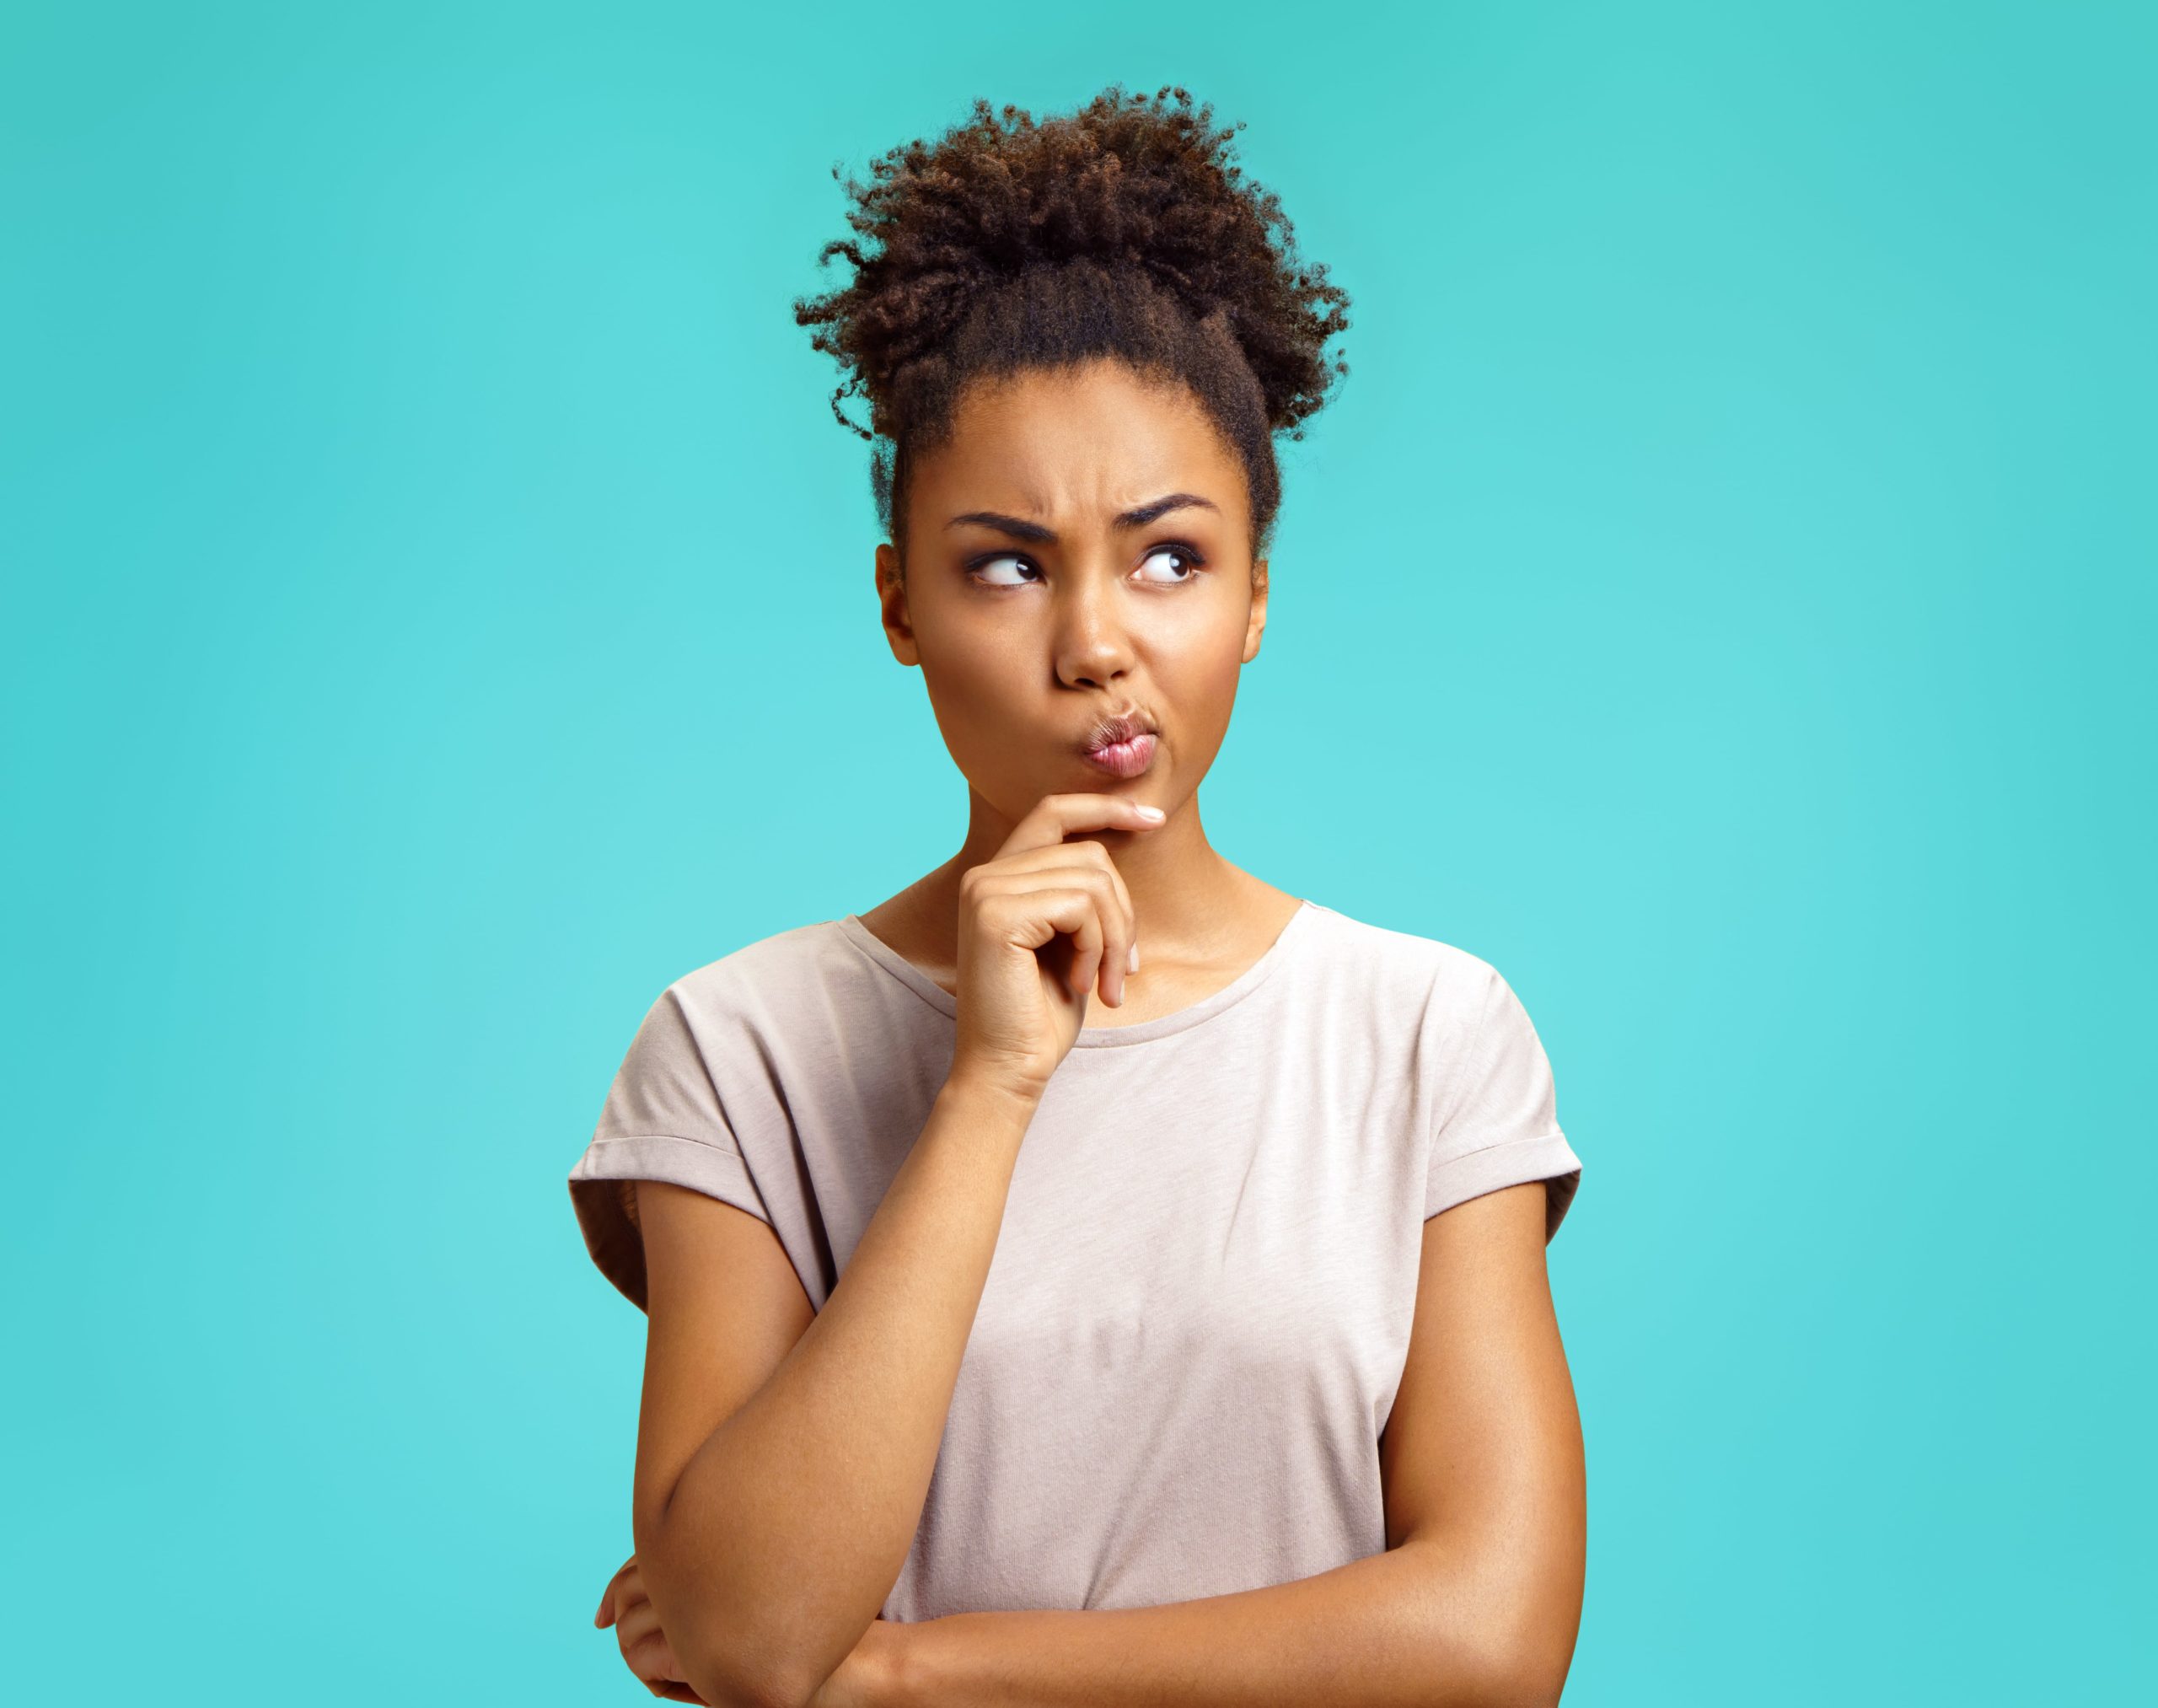 Woman with hand on face thinking in front of a blue background